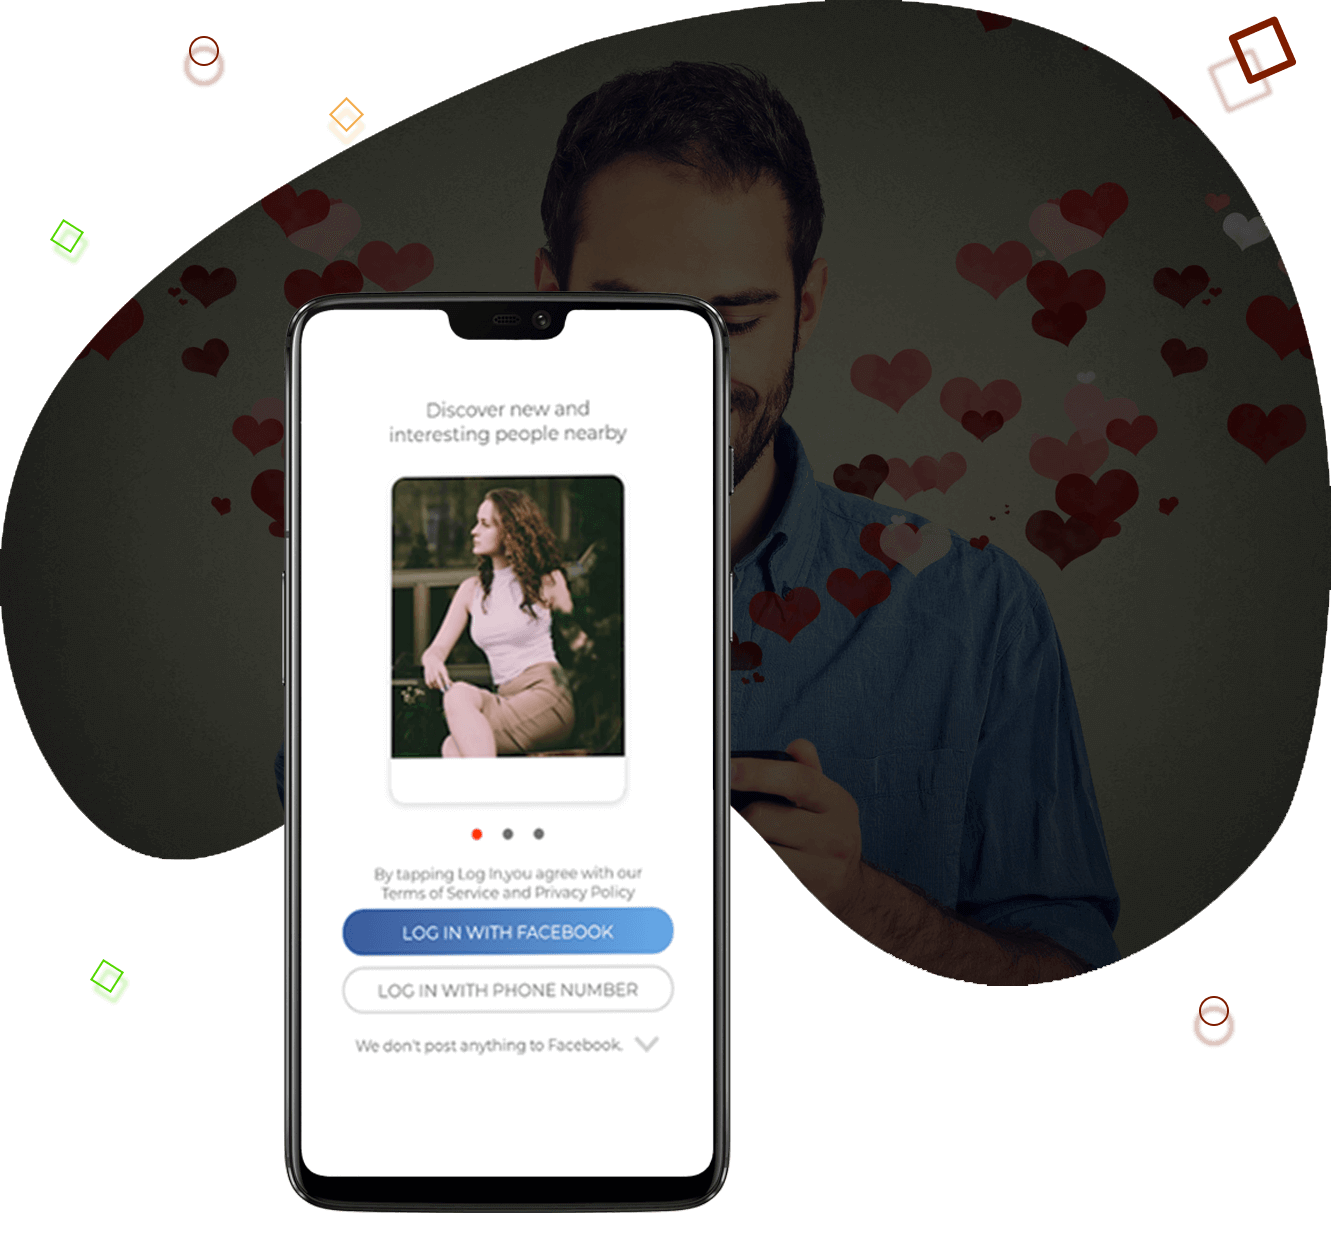 13 Best Christian Dating Sites and Apps: Meet Christian Singles Near You